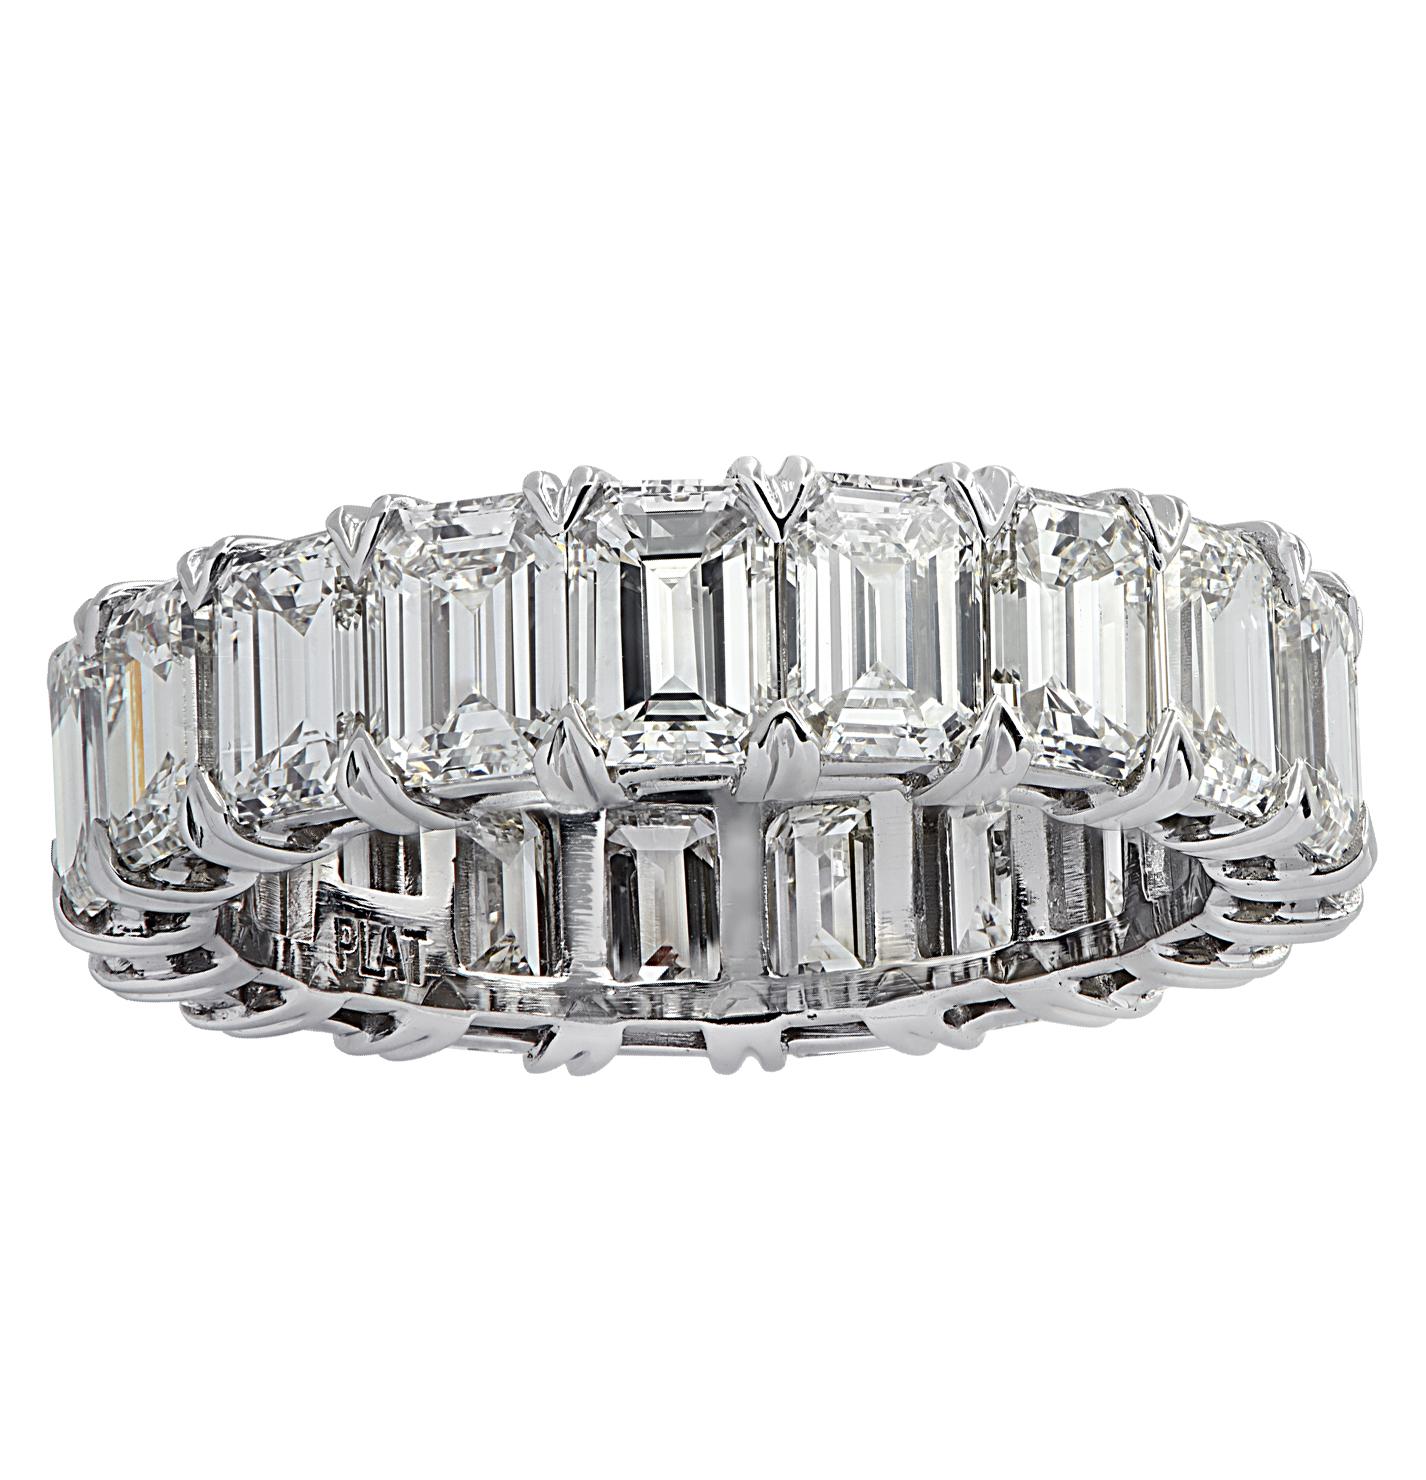 Exquisite Vivid Diamonds eternity band crafted by hand in Platinum, showcasing 19 stunning emerald cut diamonds weighing 6.43 carats total, F-G color, VS clarity. Each diamond is carefully selected, perfectly matched and set in a seamless sea of